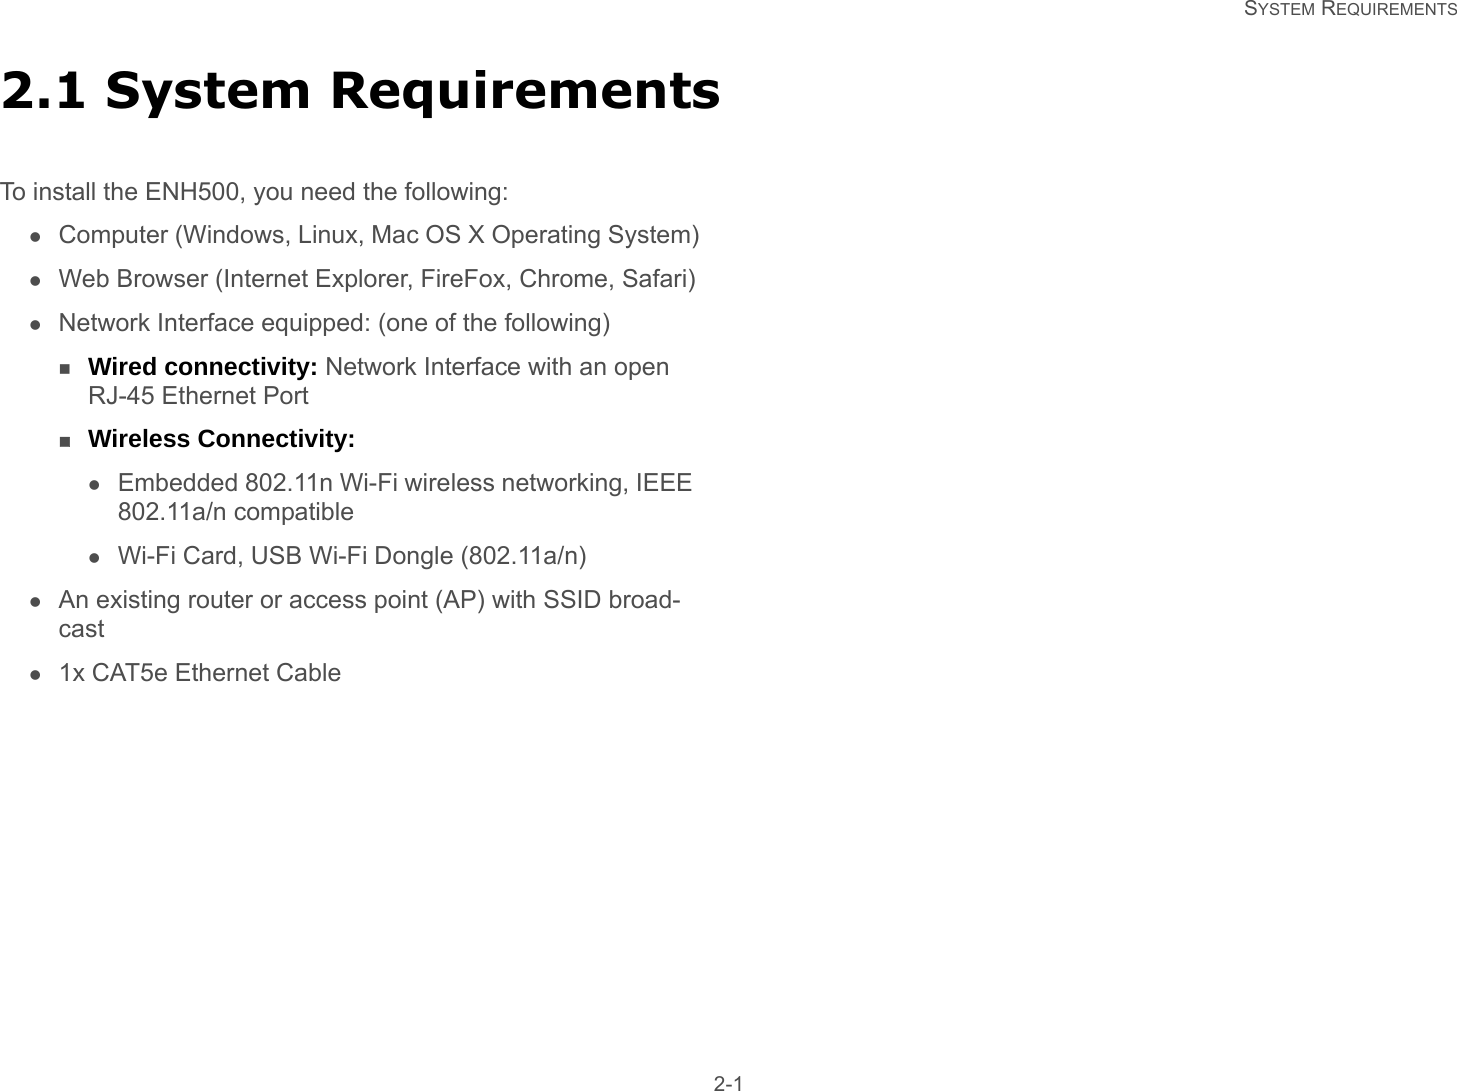   SYSTEM REQUIREMENTS 2-12.1 System RequirementsTo install the ENH500, you need the following:Computer (Windows, Linux, Mac OS X Operating System)Web Browser (Internet Explorer, FireFox, Chrome, Safari)Network Interface equipped: (one of the following)Wired connectivity: Network Interface with an open RJ-45 Ethernet PortWireless Connectivity:Embedded 802.11n Wi-Fi wireless networking, IEEE 802.11a/n compatibleWi-Fi Card, USB Wi-Fi Dongle (802.11a/n)An existing router or access point (AP) with SSID broad-cast1x CAT5e Ethernet Cable